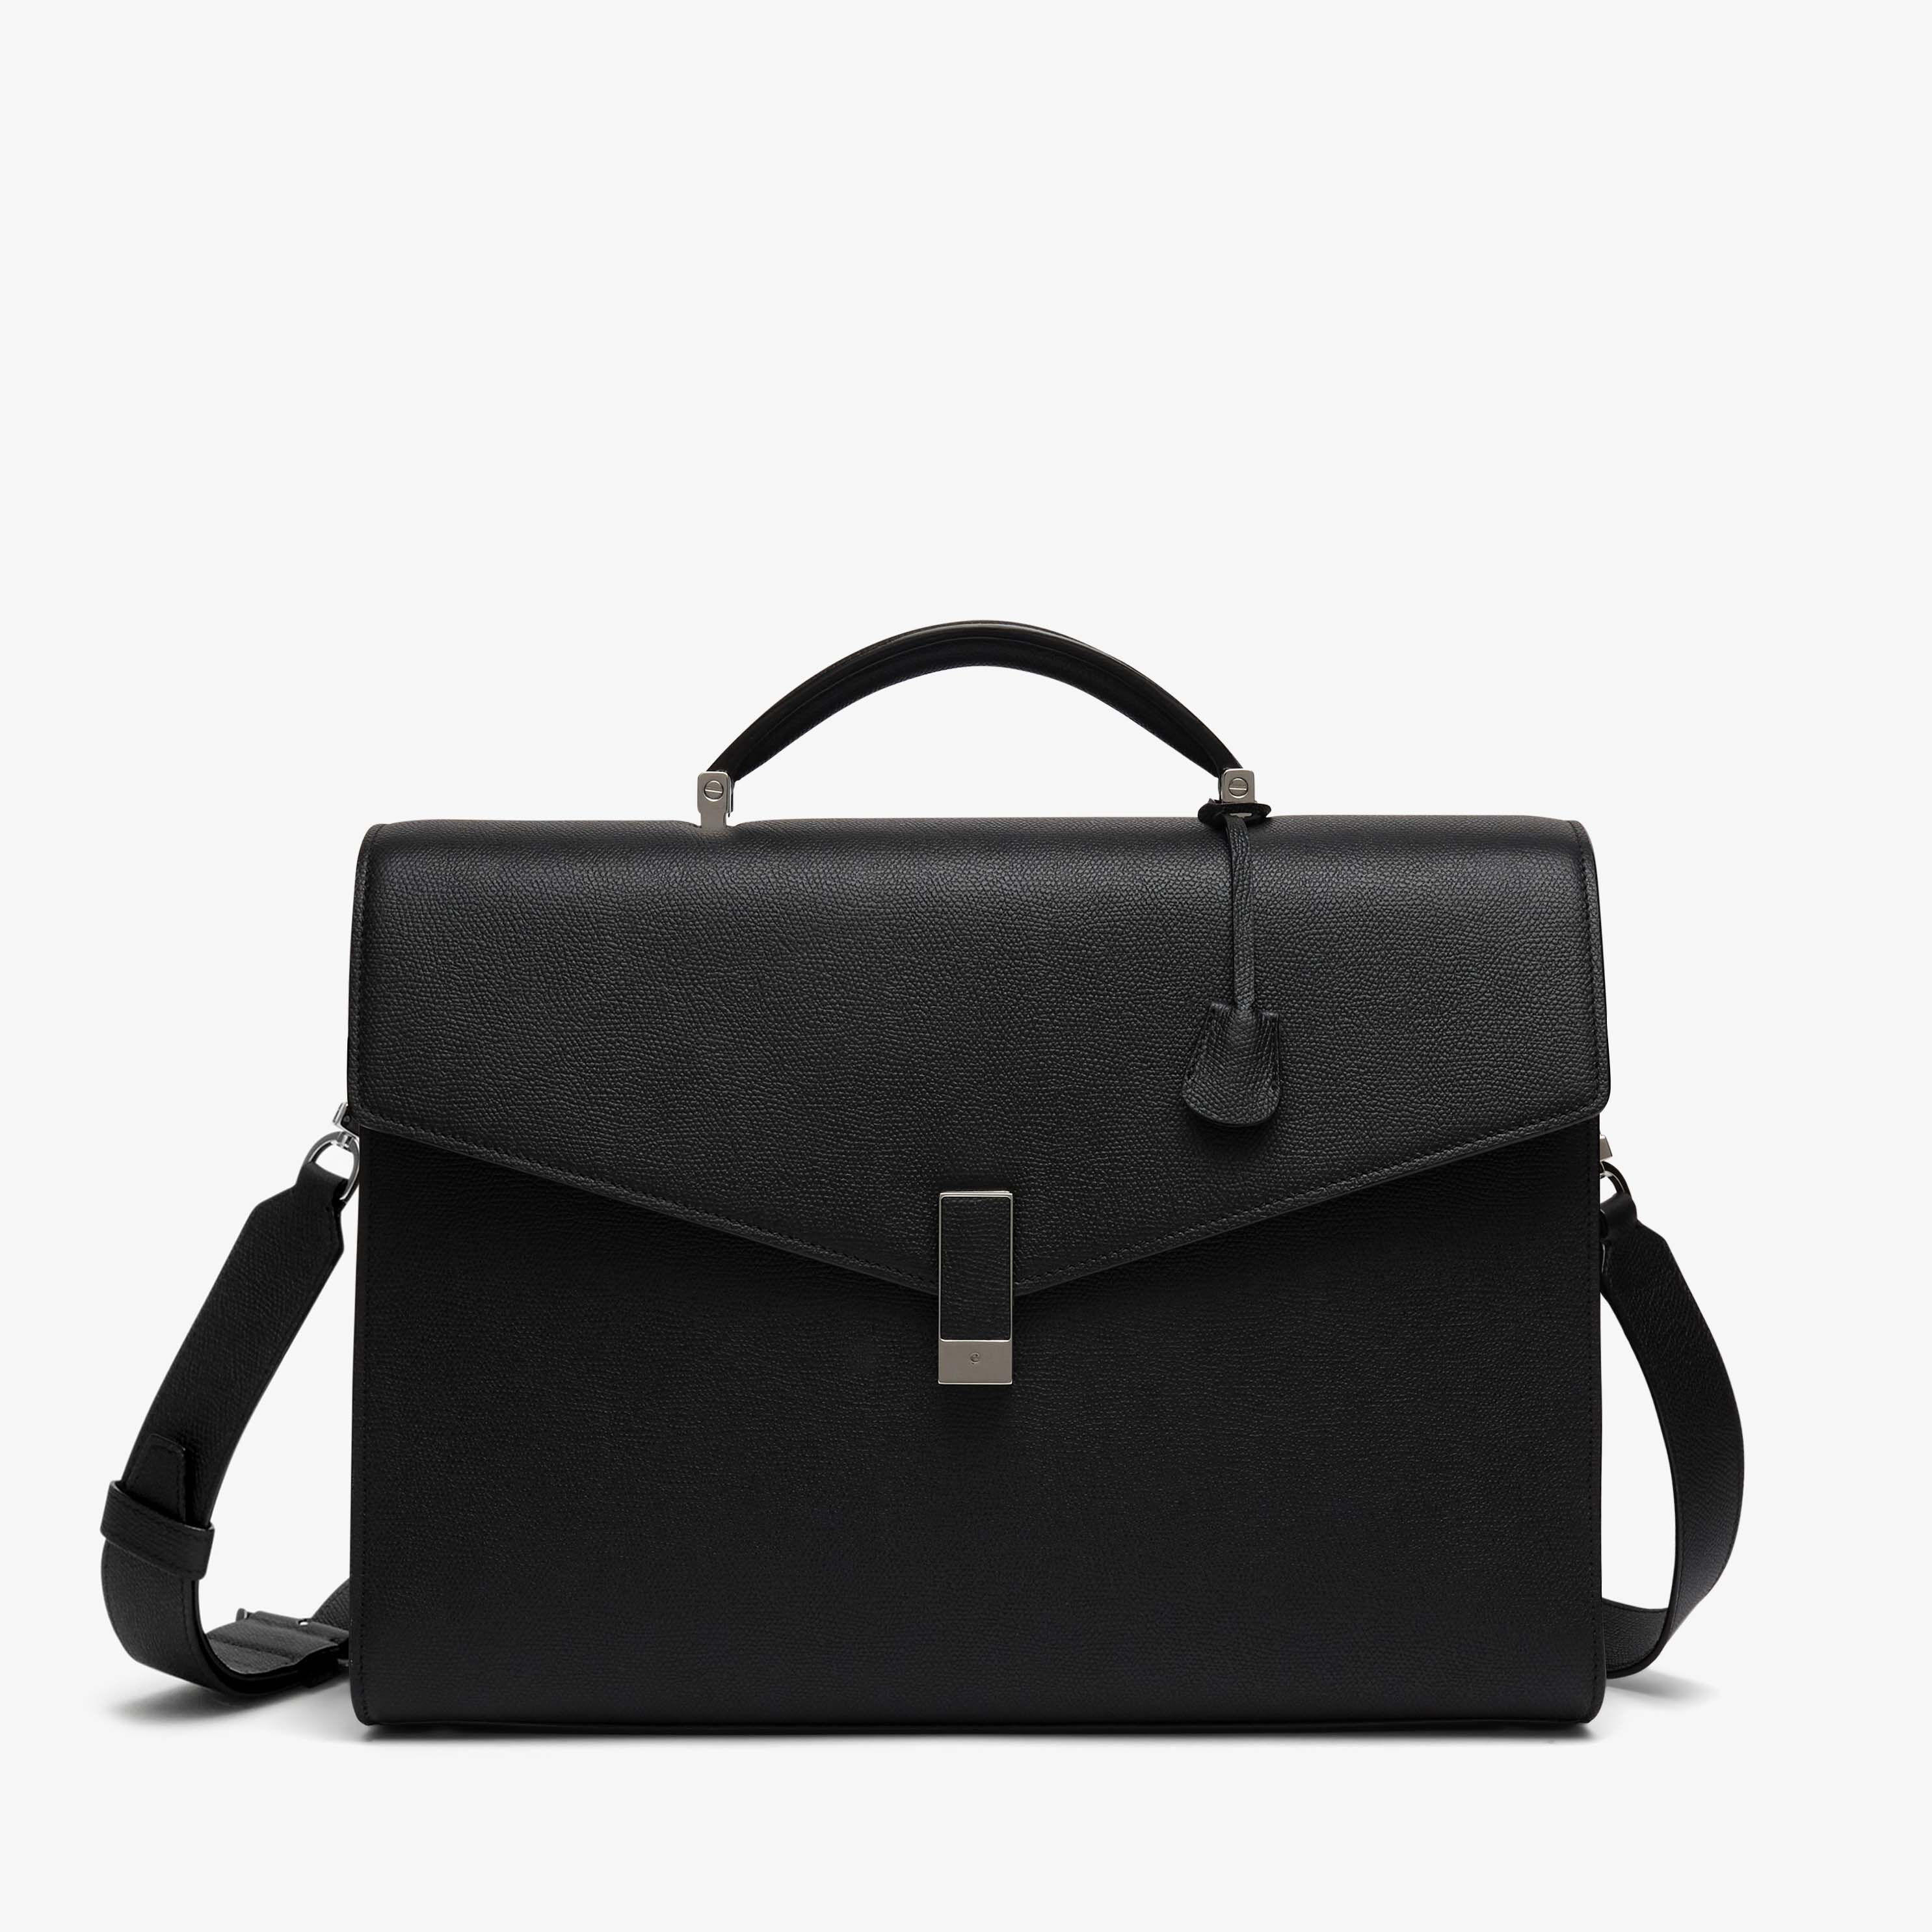 Men's Black Grained Leather Luxury briefcase | Valextra Iside